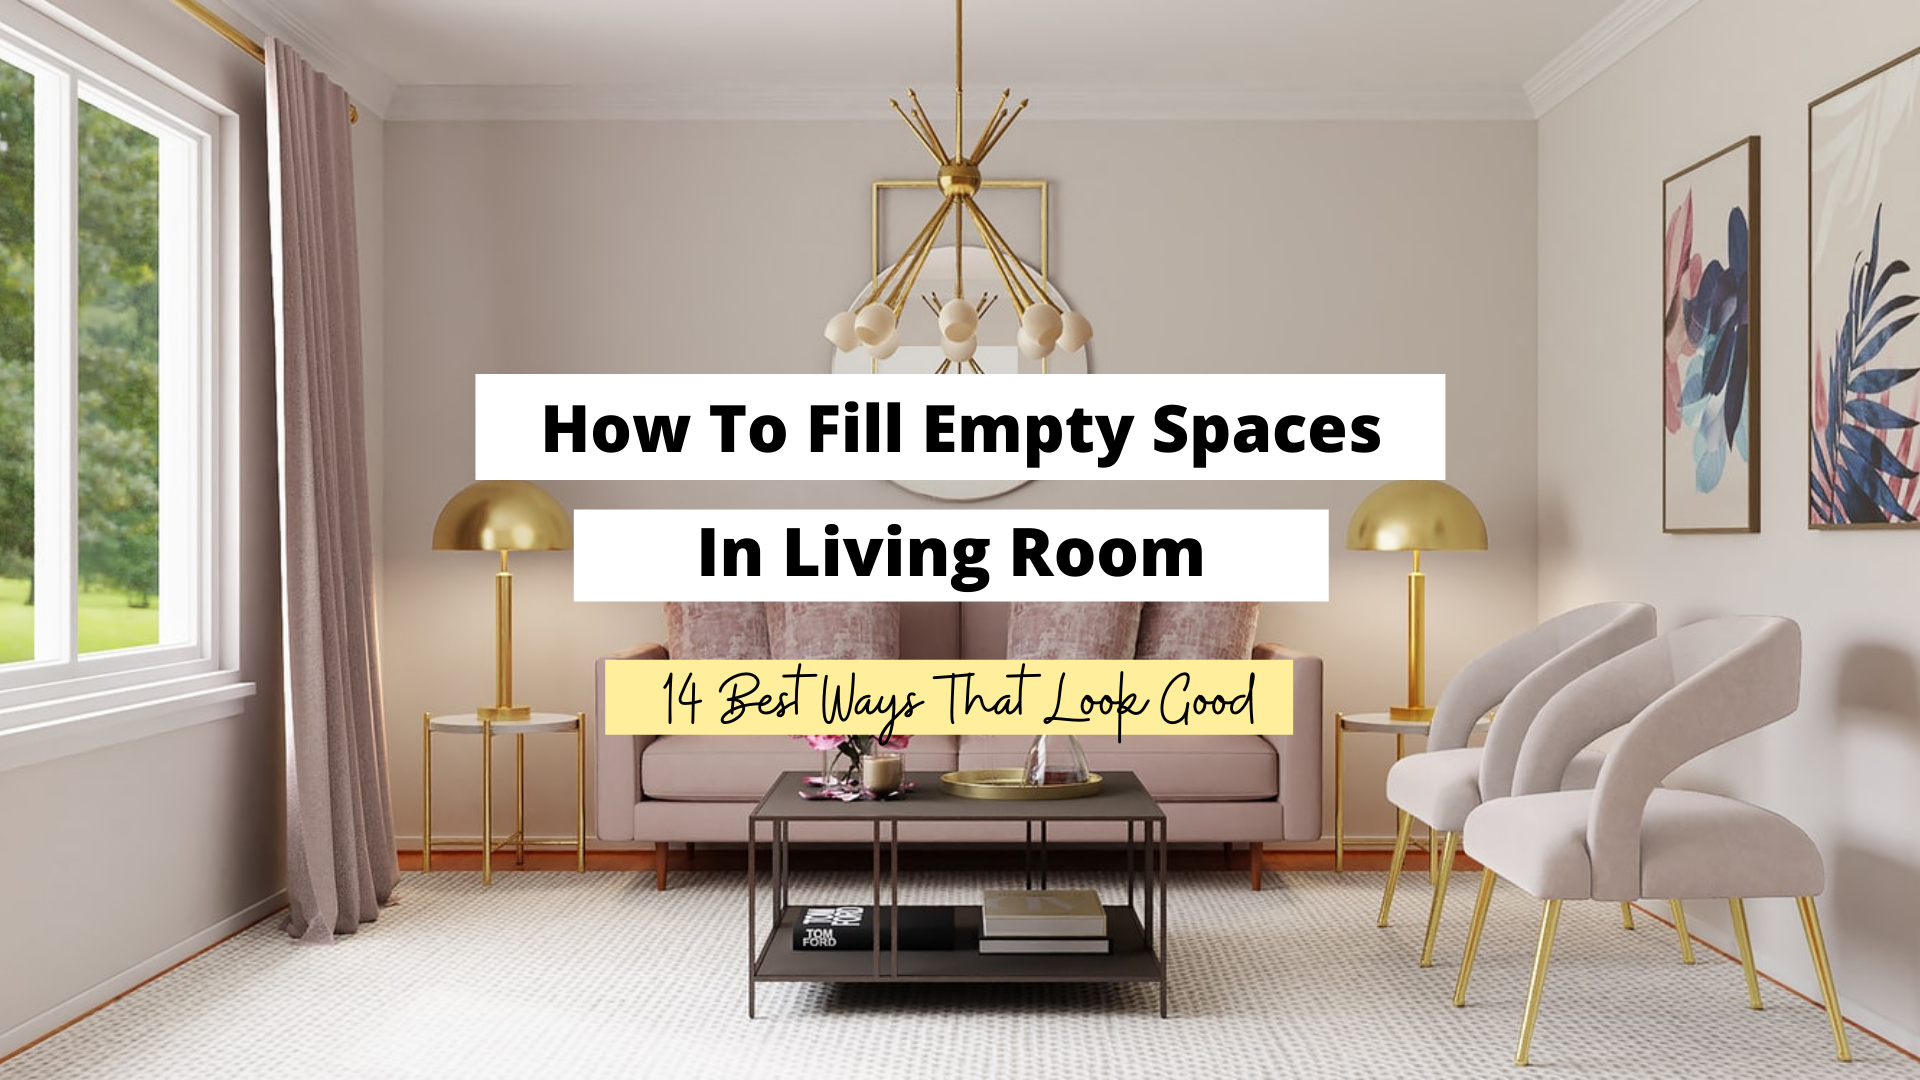 How To Fill Empty Spaces In A Living Room: 14 Best Ways - Craftsonfire